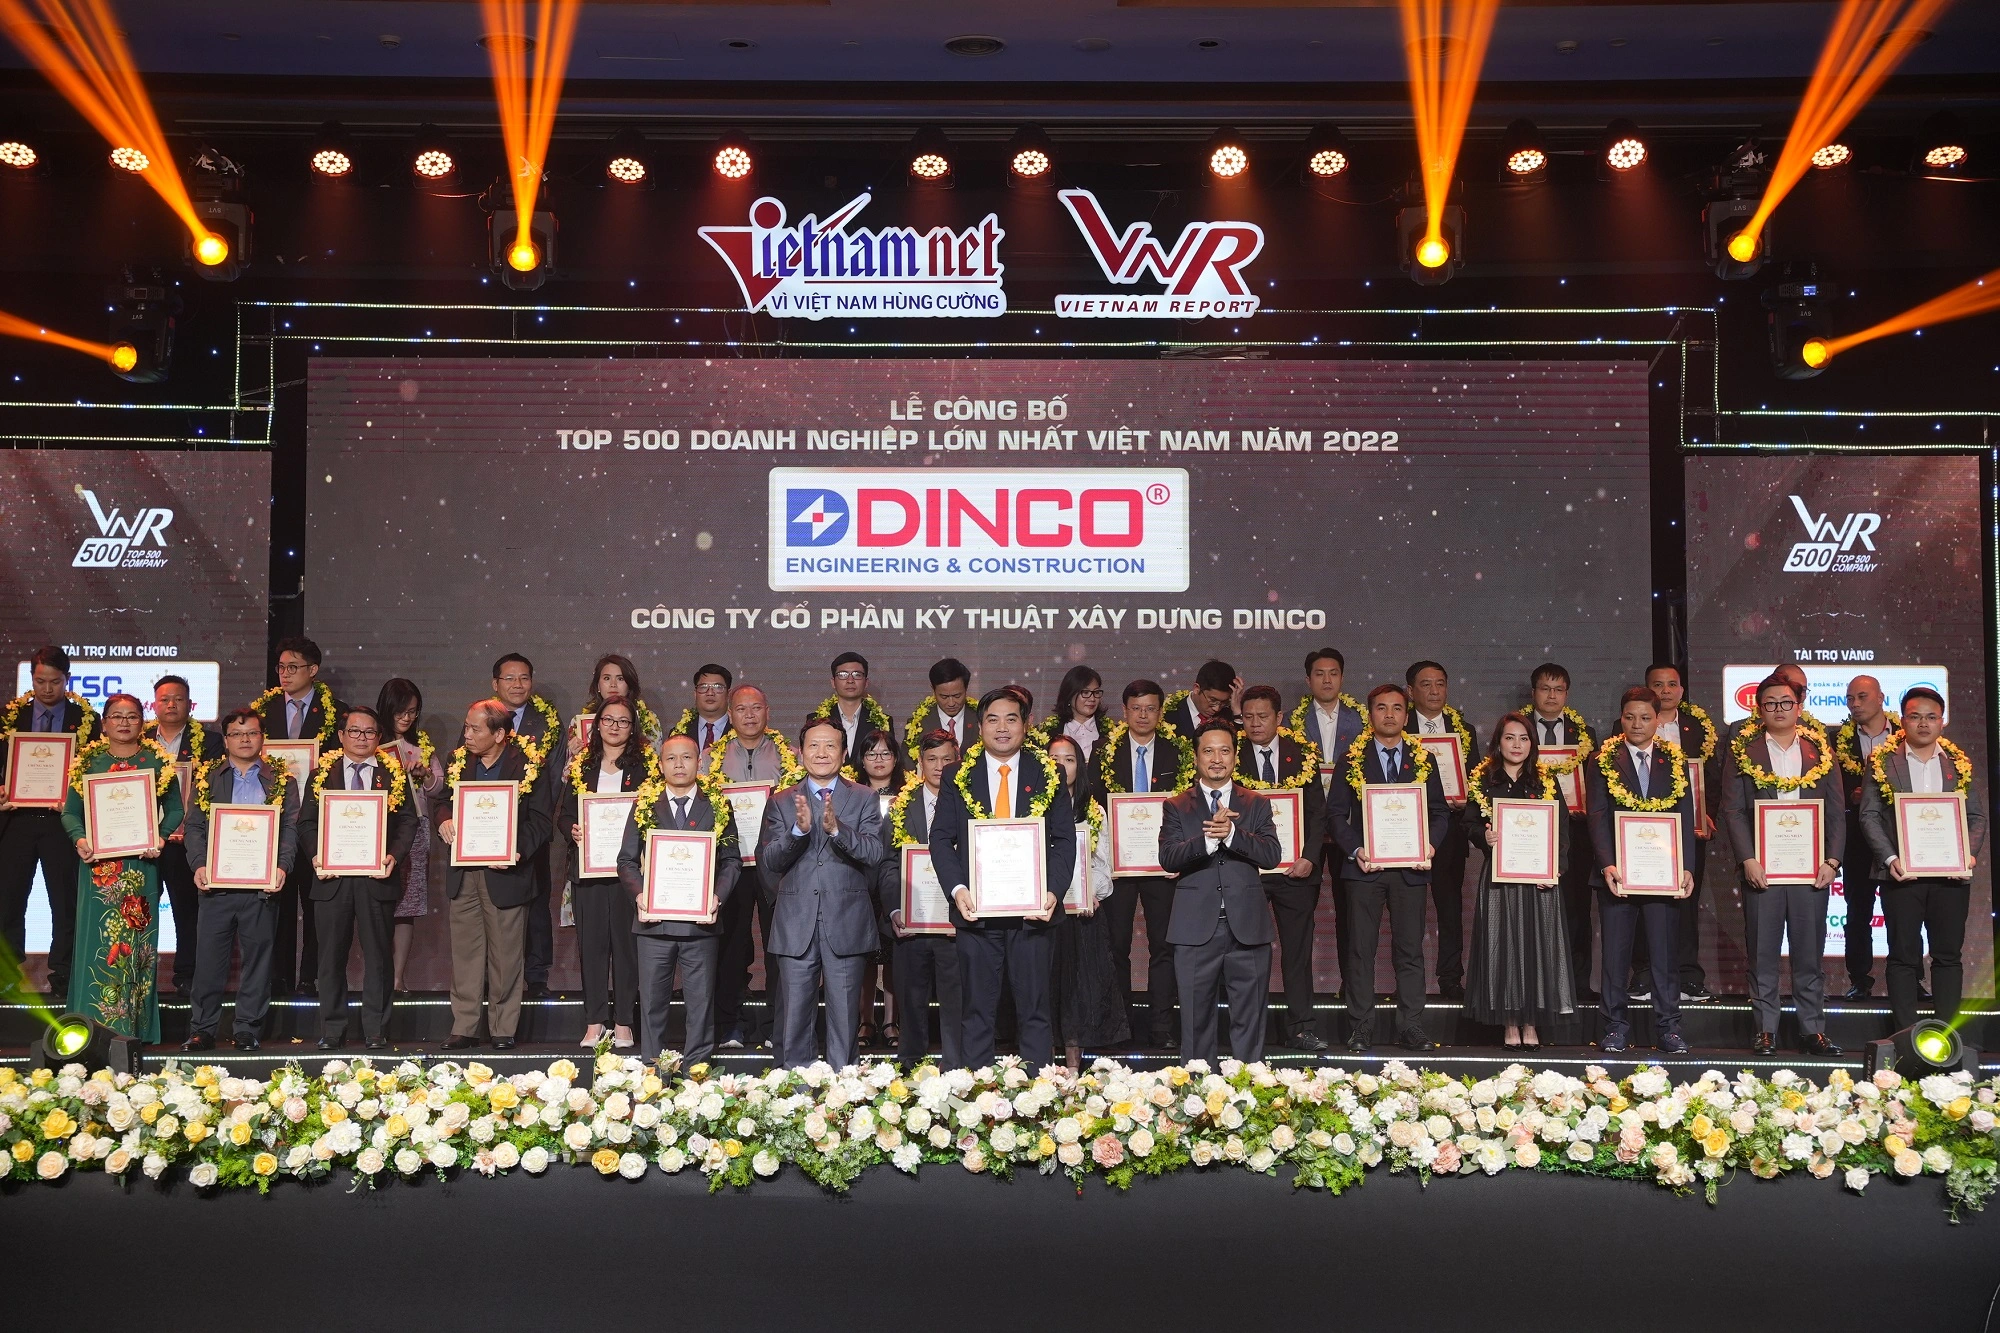 DINCO E&C EXCELLENTLY ACHIEVING THE TROPHY OF TOP 500 BIGGEST ENTERPRISES IN VIETNAM FOR THE 4th TIME